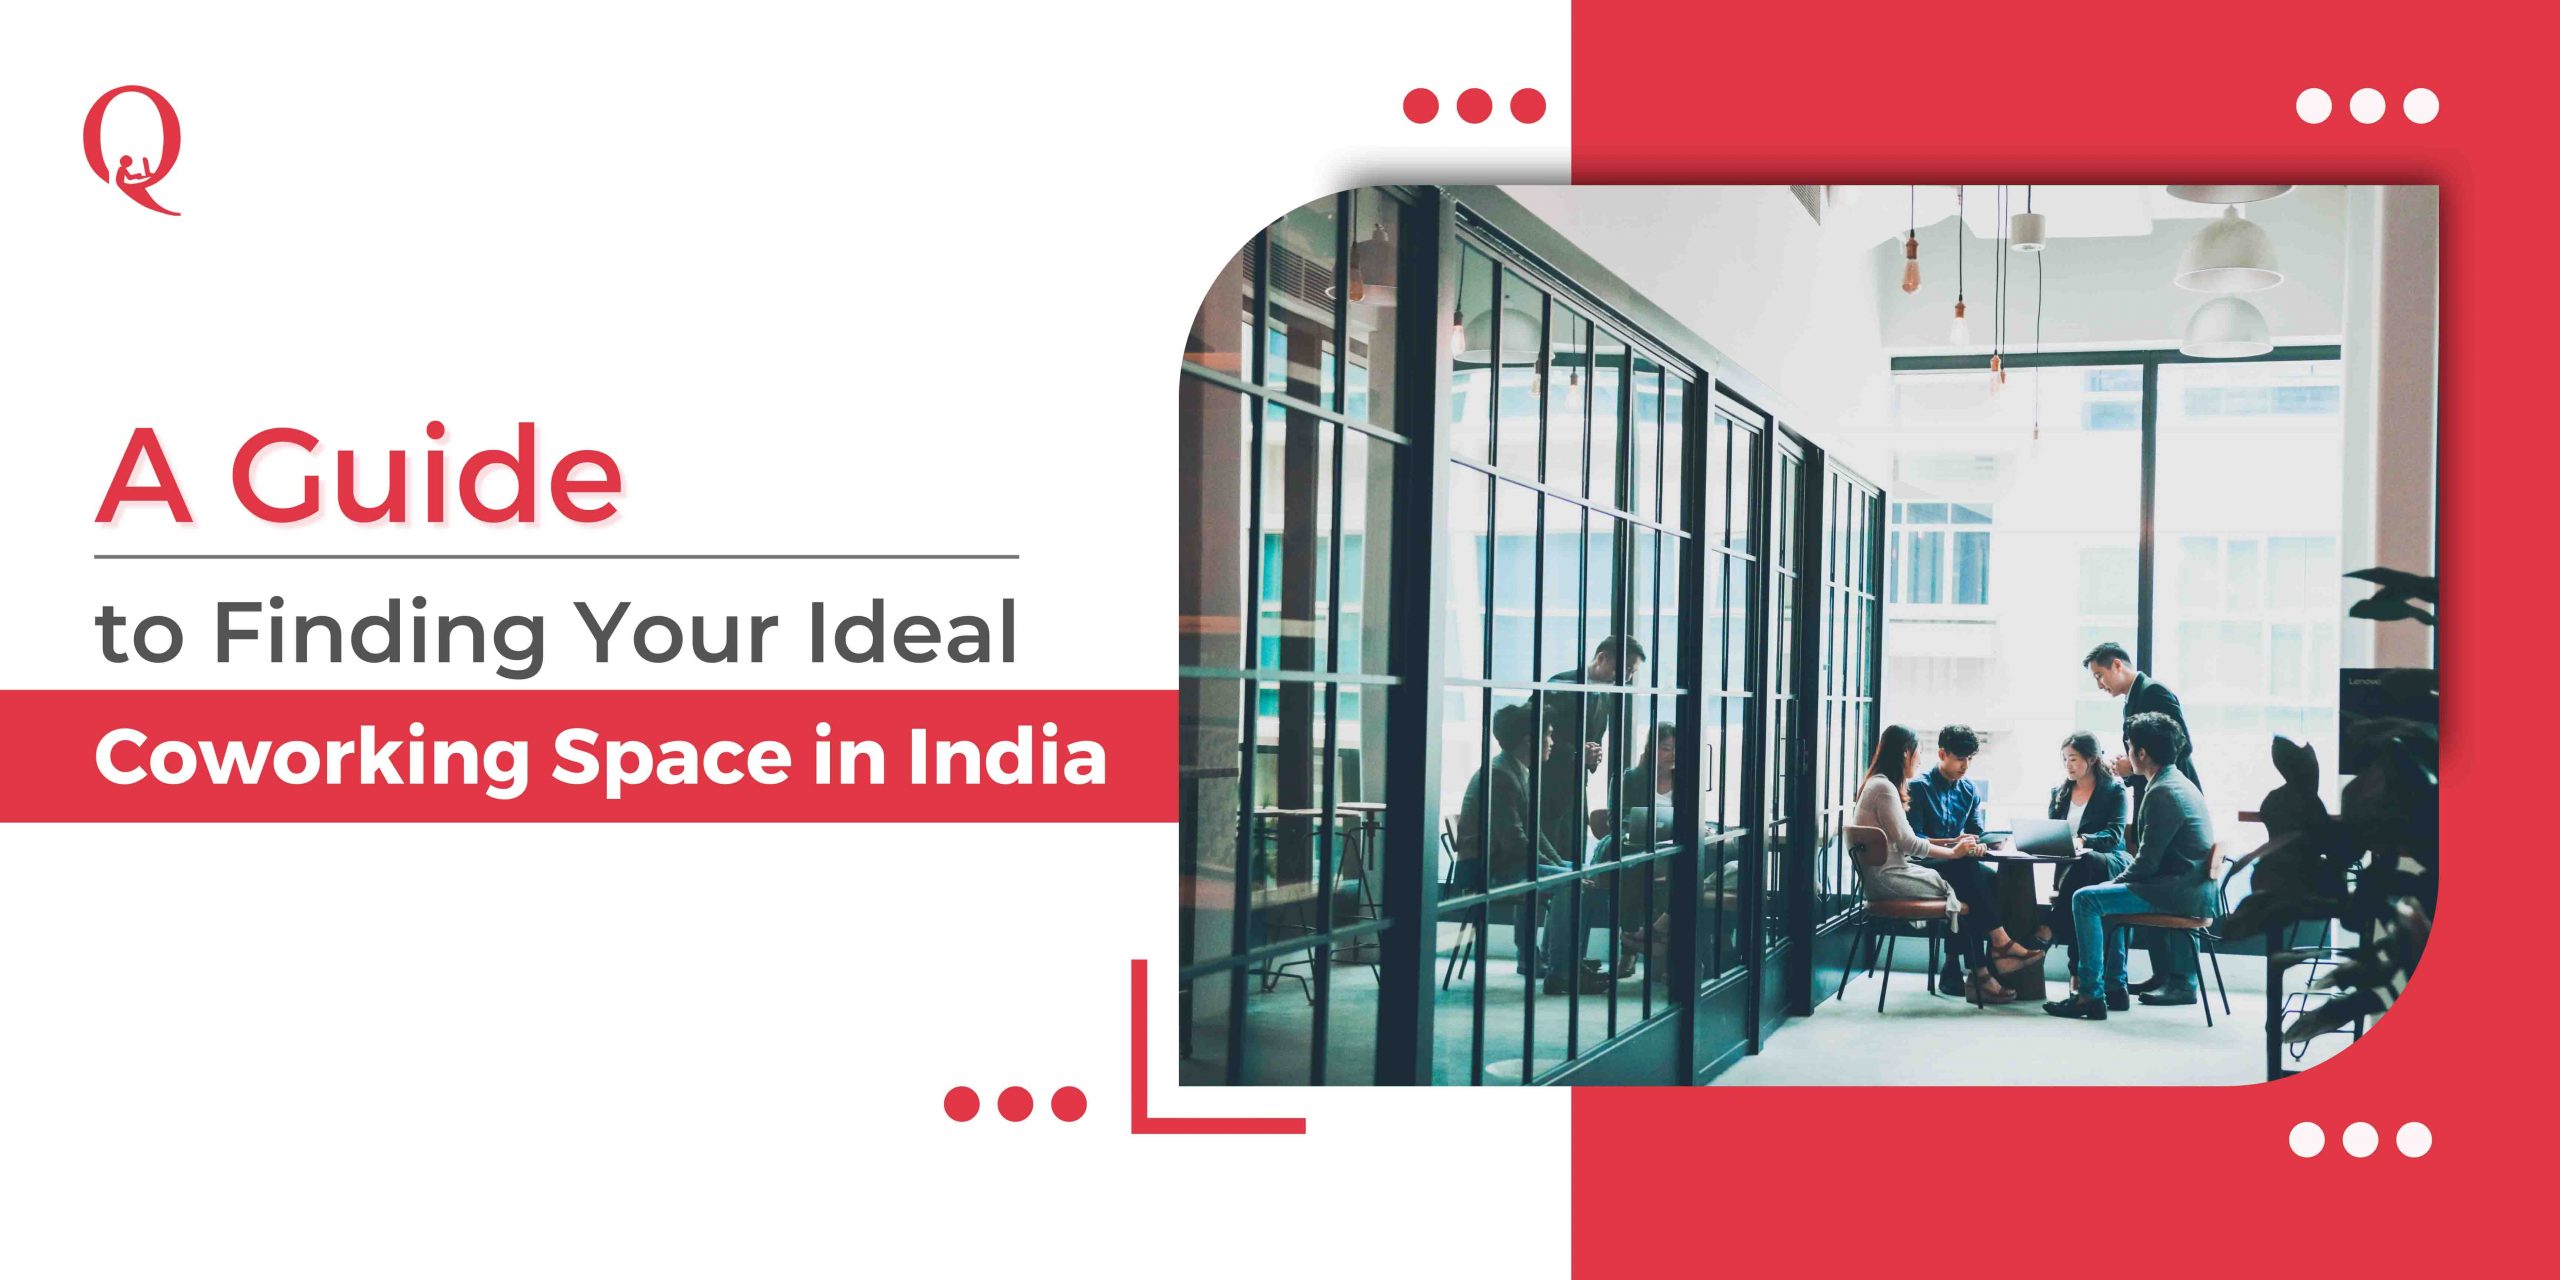 Find Your Ideal Coworking Space in India